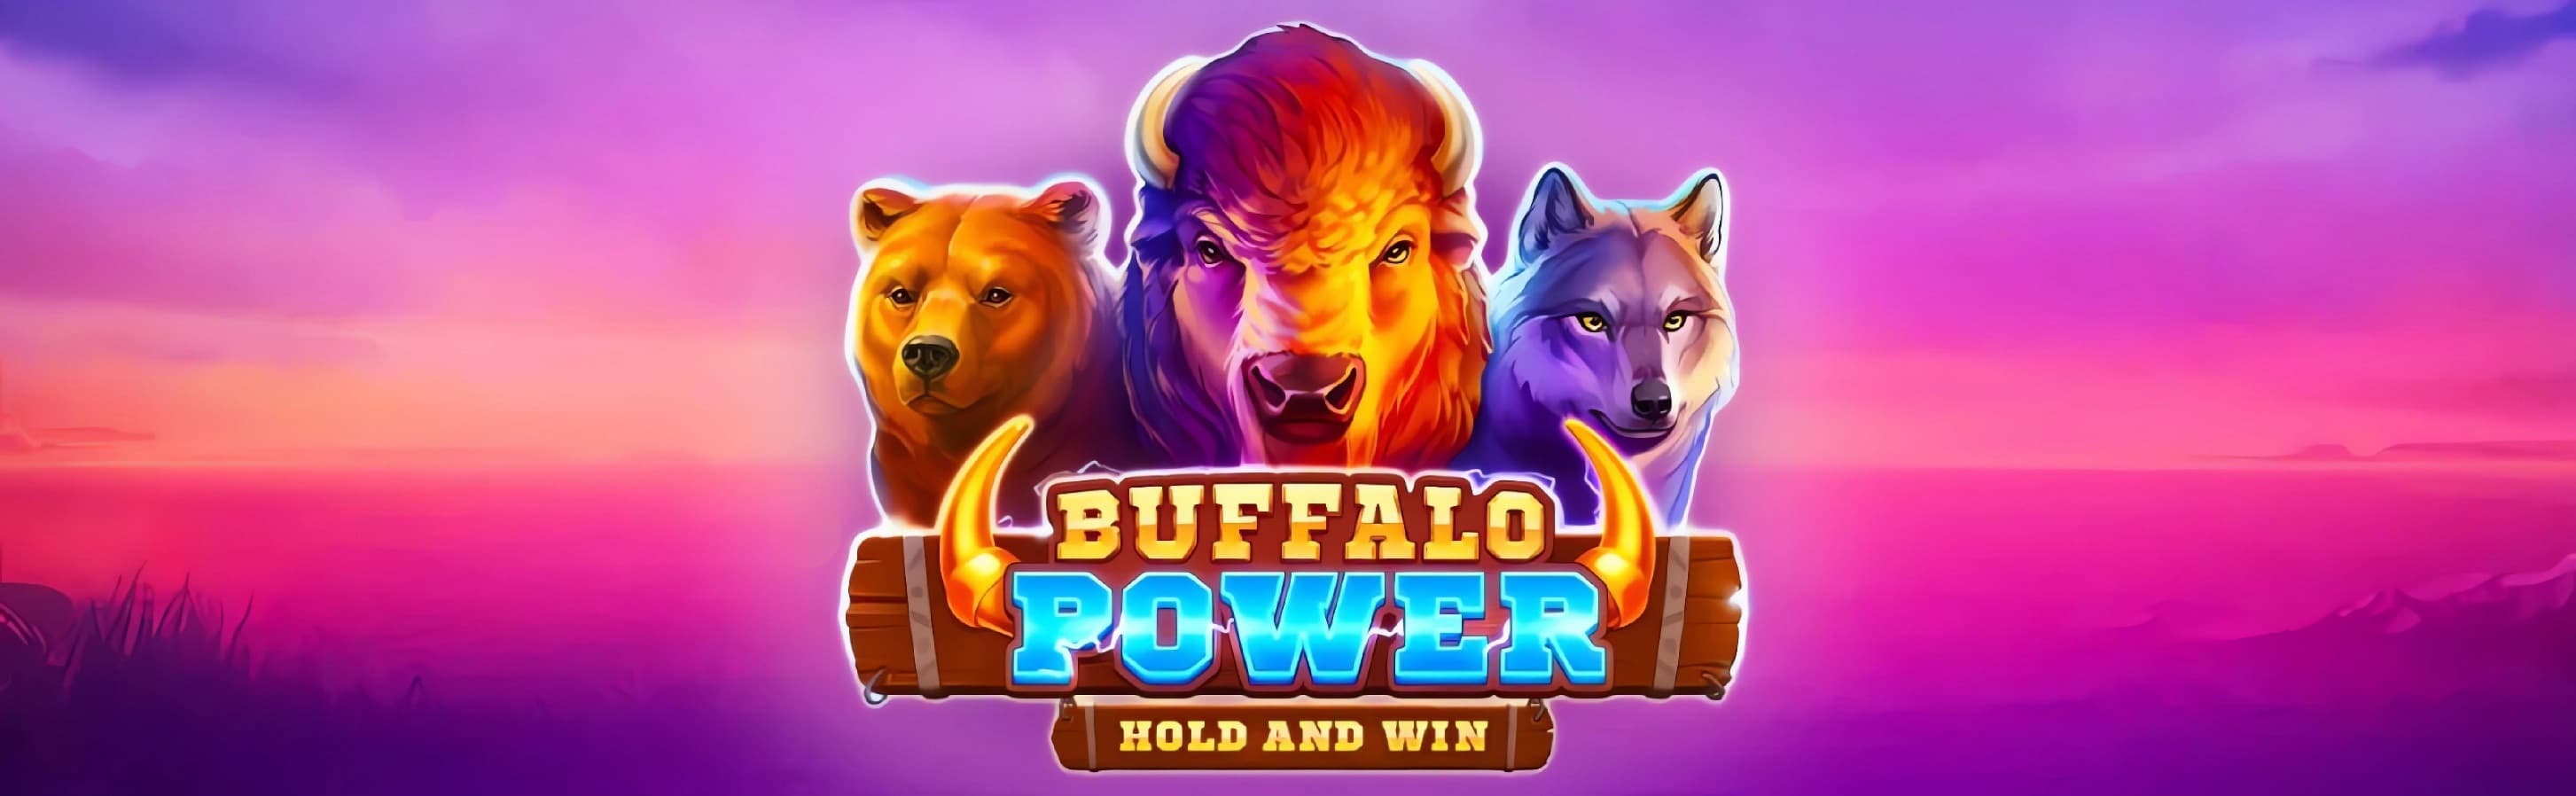 Buffalo Power: Hold and Win Mobile cover